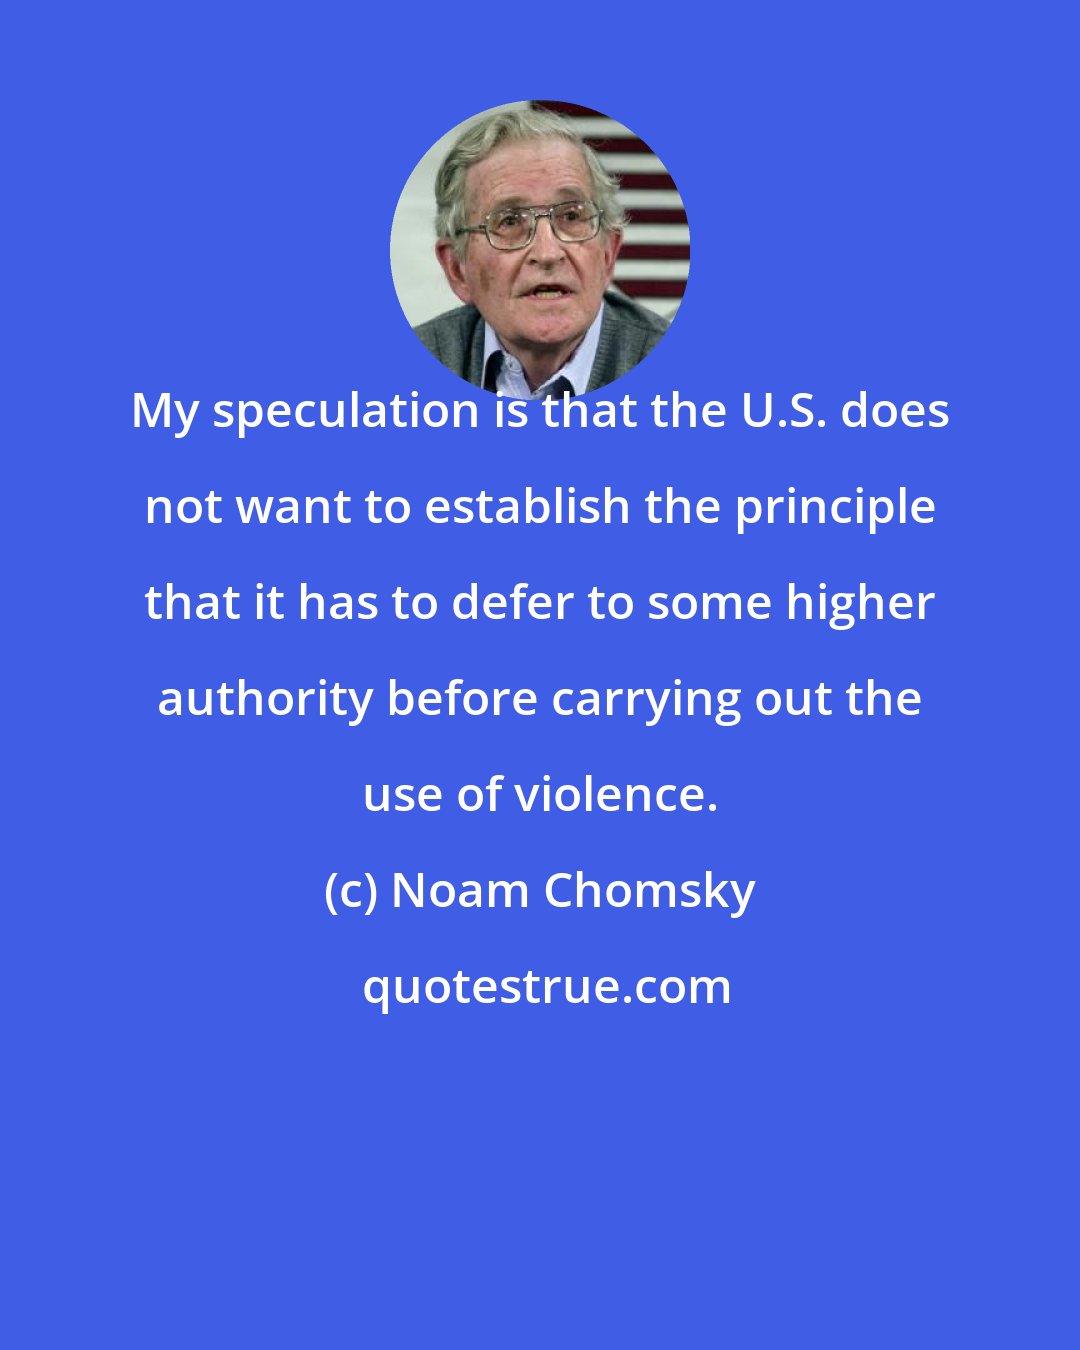 Noam Chomsky: My speculation is that the U.S. does not want to establish the principle that it has to defer to some higher authority before carrying out the use of violence.